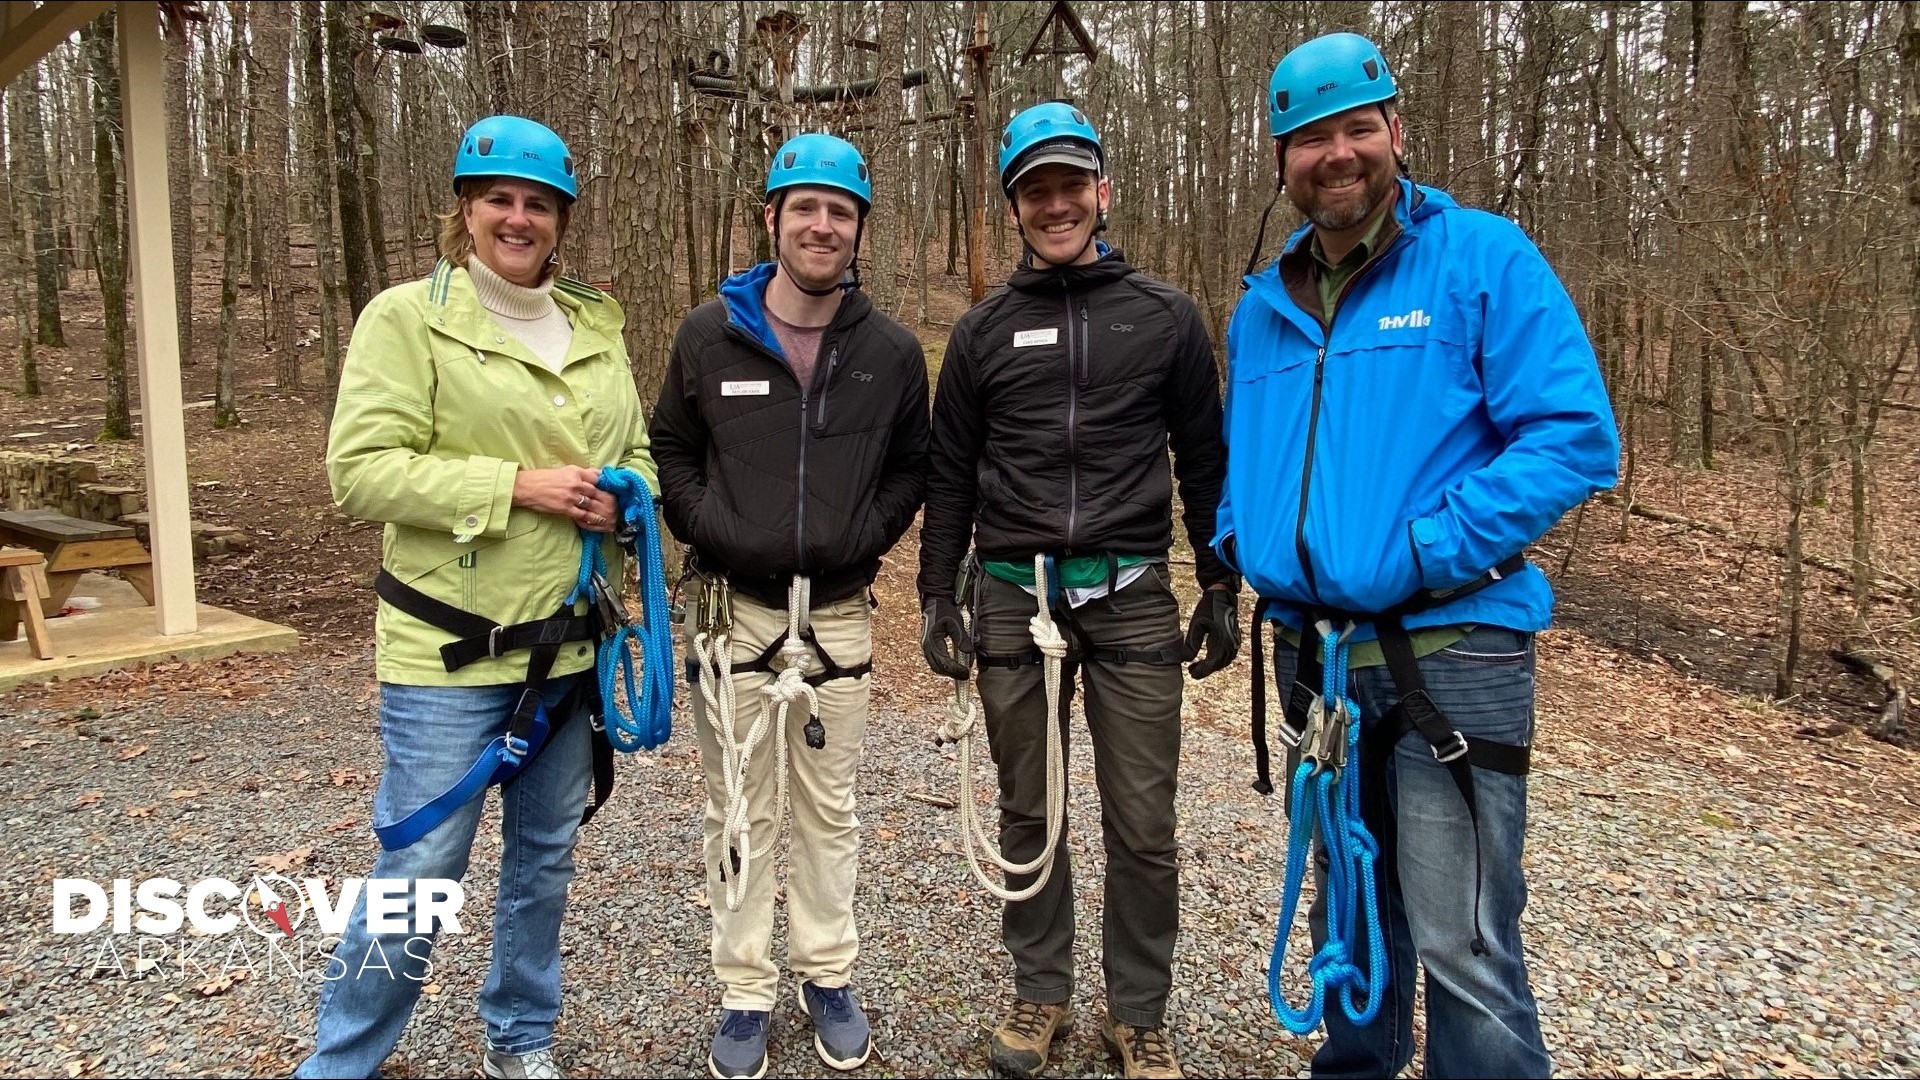 Adam Bledsoe helps Theba Lolley conquer her fears through a little zip lining at the Vine Center in Little Rock!